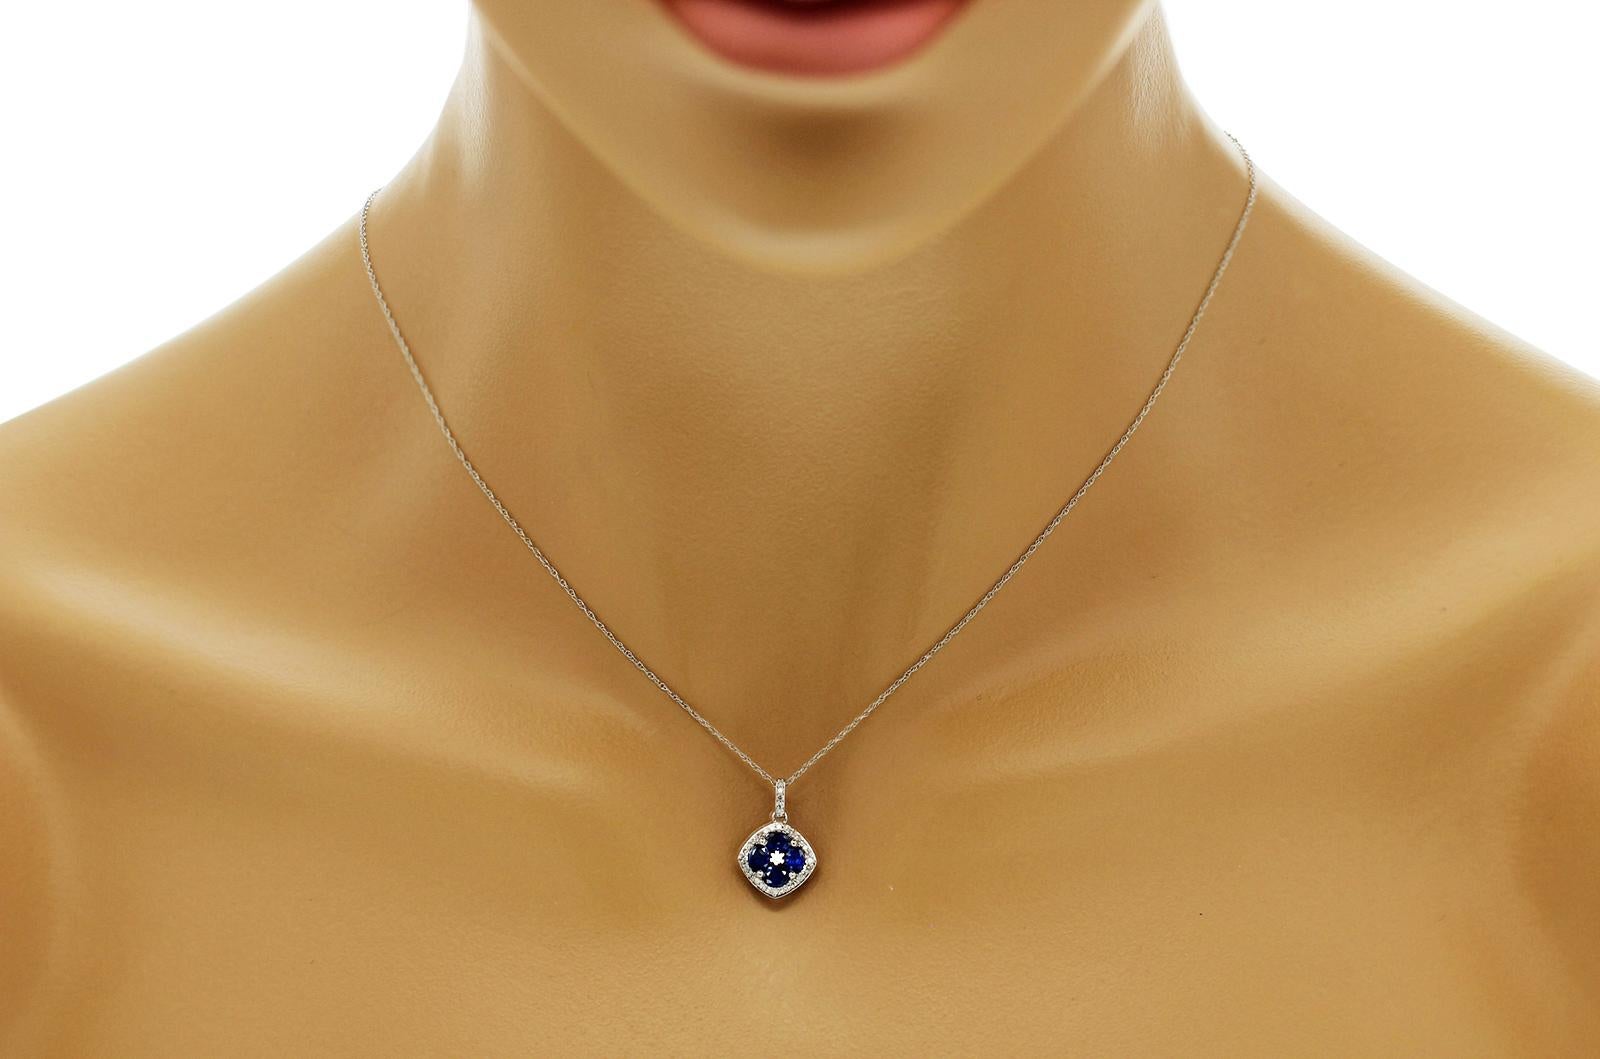 100% Authentic, 100% Customer Satisfaction

Pendant: 12 mm

Chain: 0.5mm

Size: 18 Inches

Metal: 14K White Gold

Hallmarks: 14K

Total Weight: 1.6 Grams

Stone Type: 1.20 CT Natural Blue Sapphire &  Diamond 0.15 CT  H  SI1

Condition: New With Tag